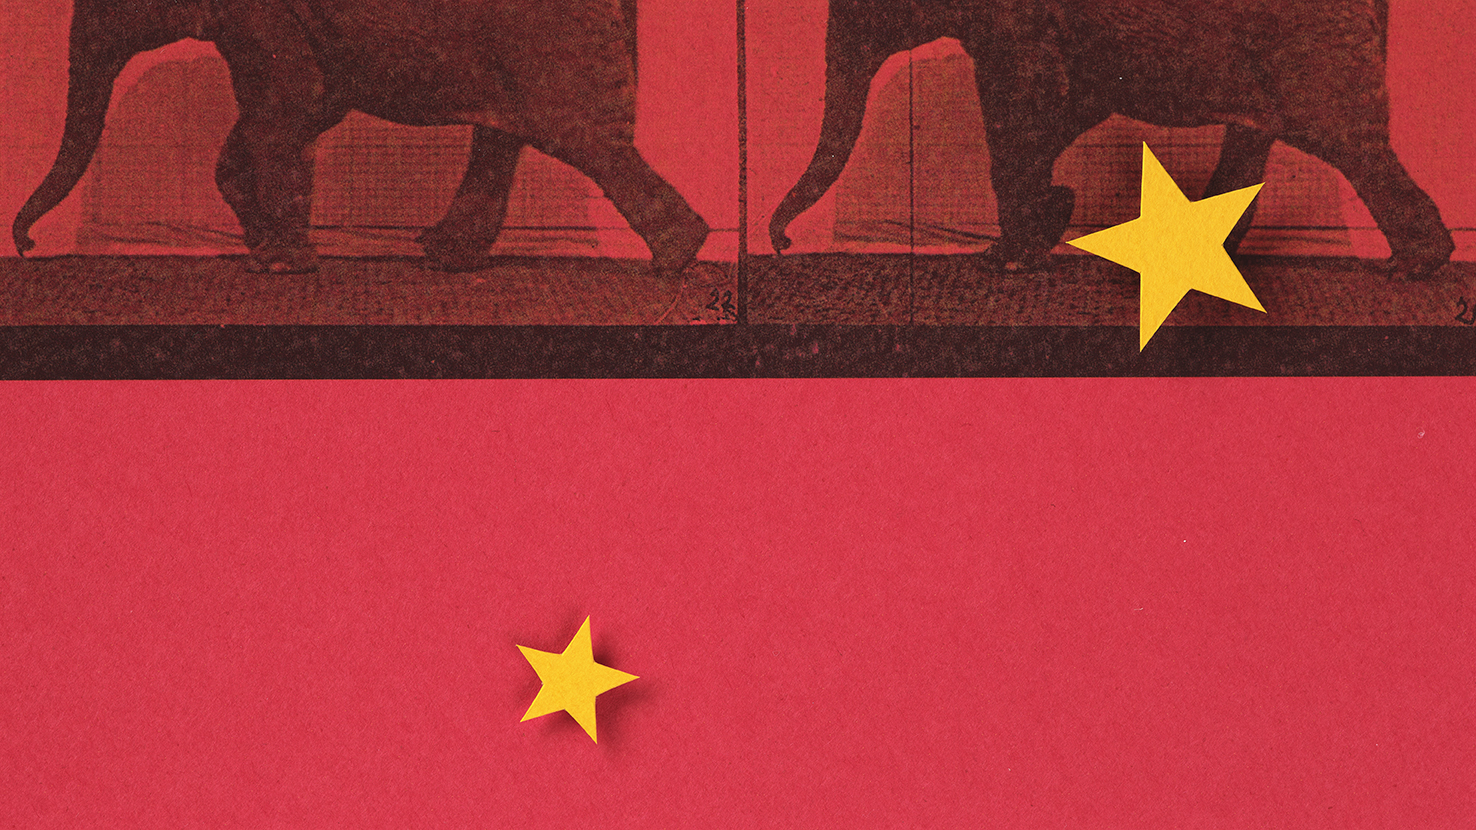 Two elephants on a red background with yellow stars over them, suggesting the Chinese flag